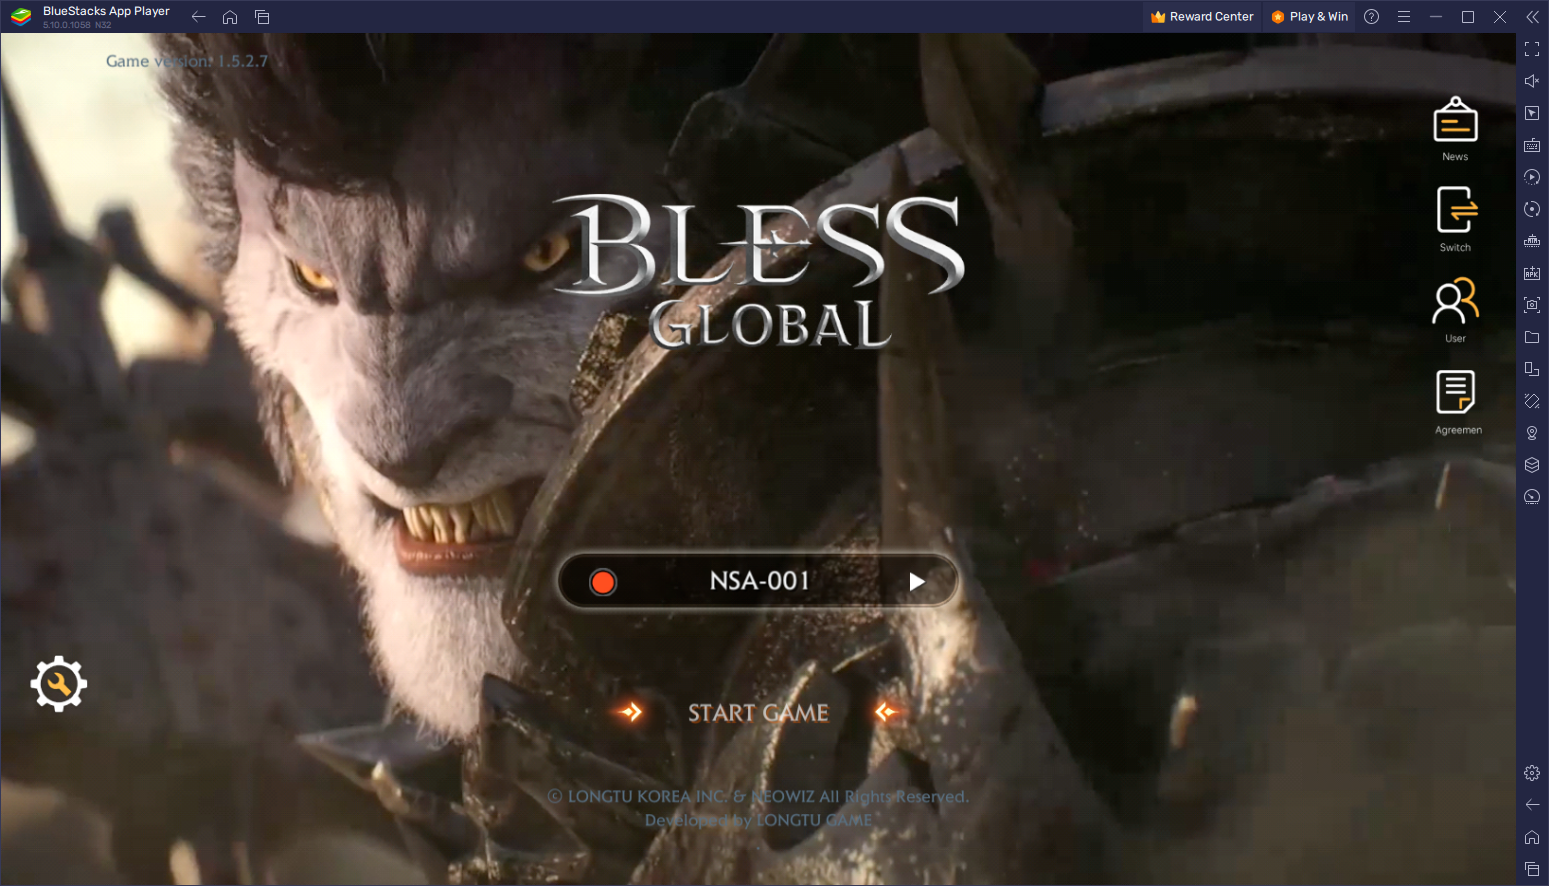 Bless Global on PC - Overview of the P2E Systems and Currencies